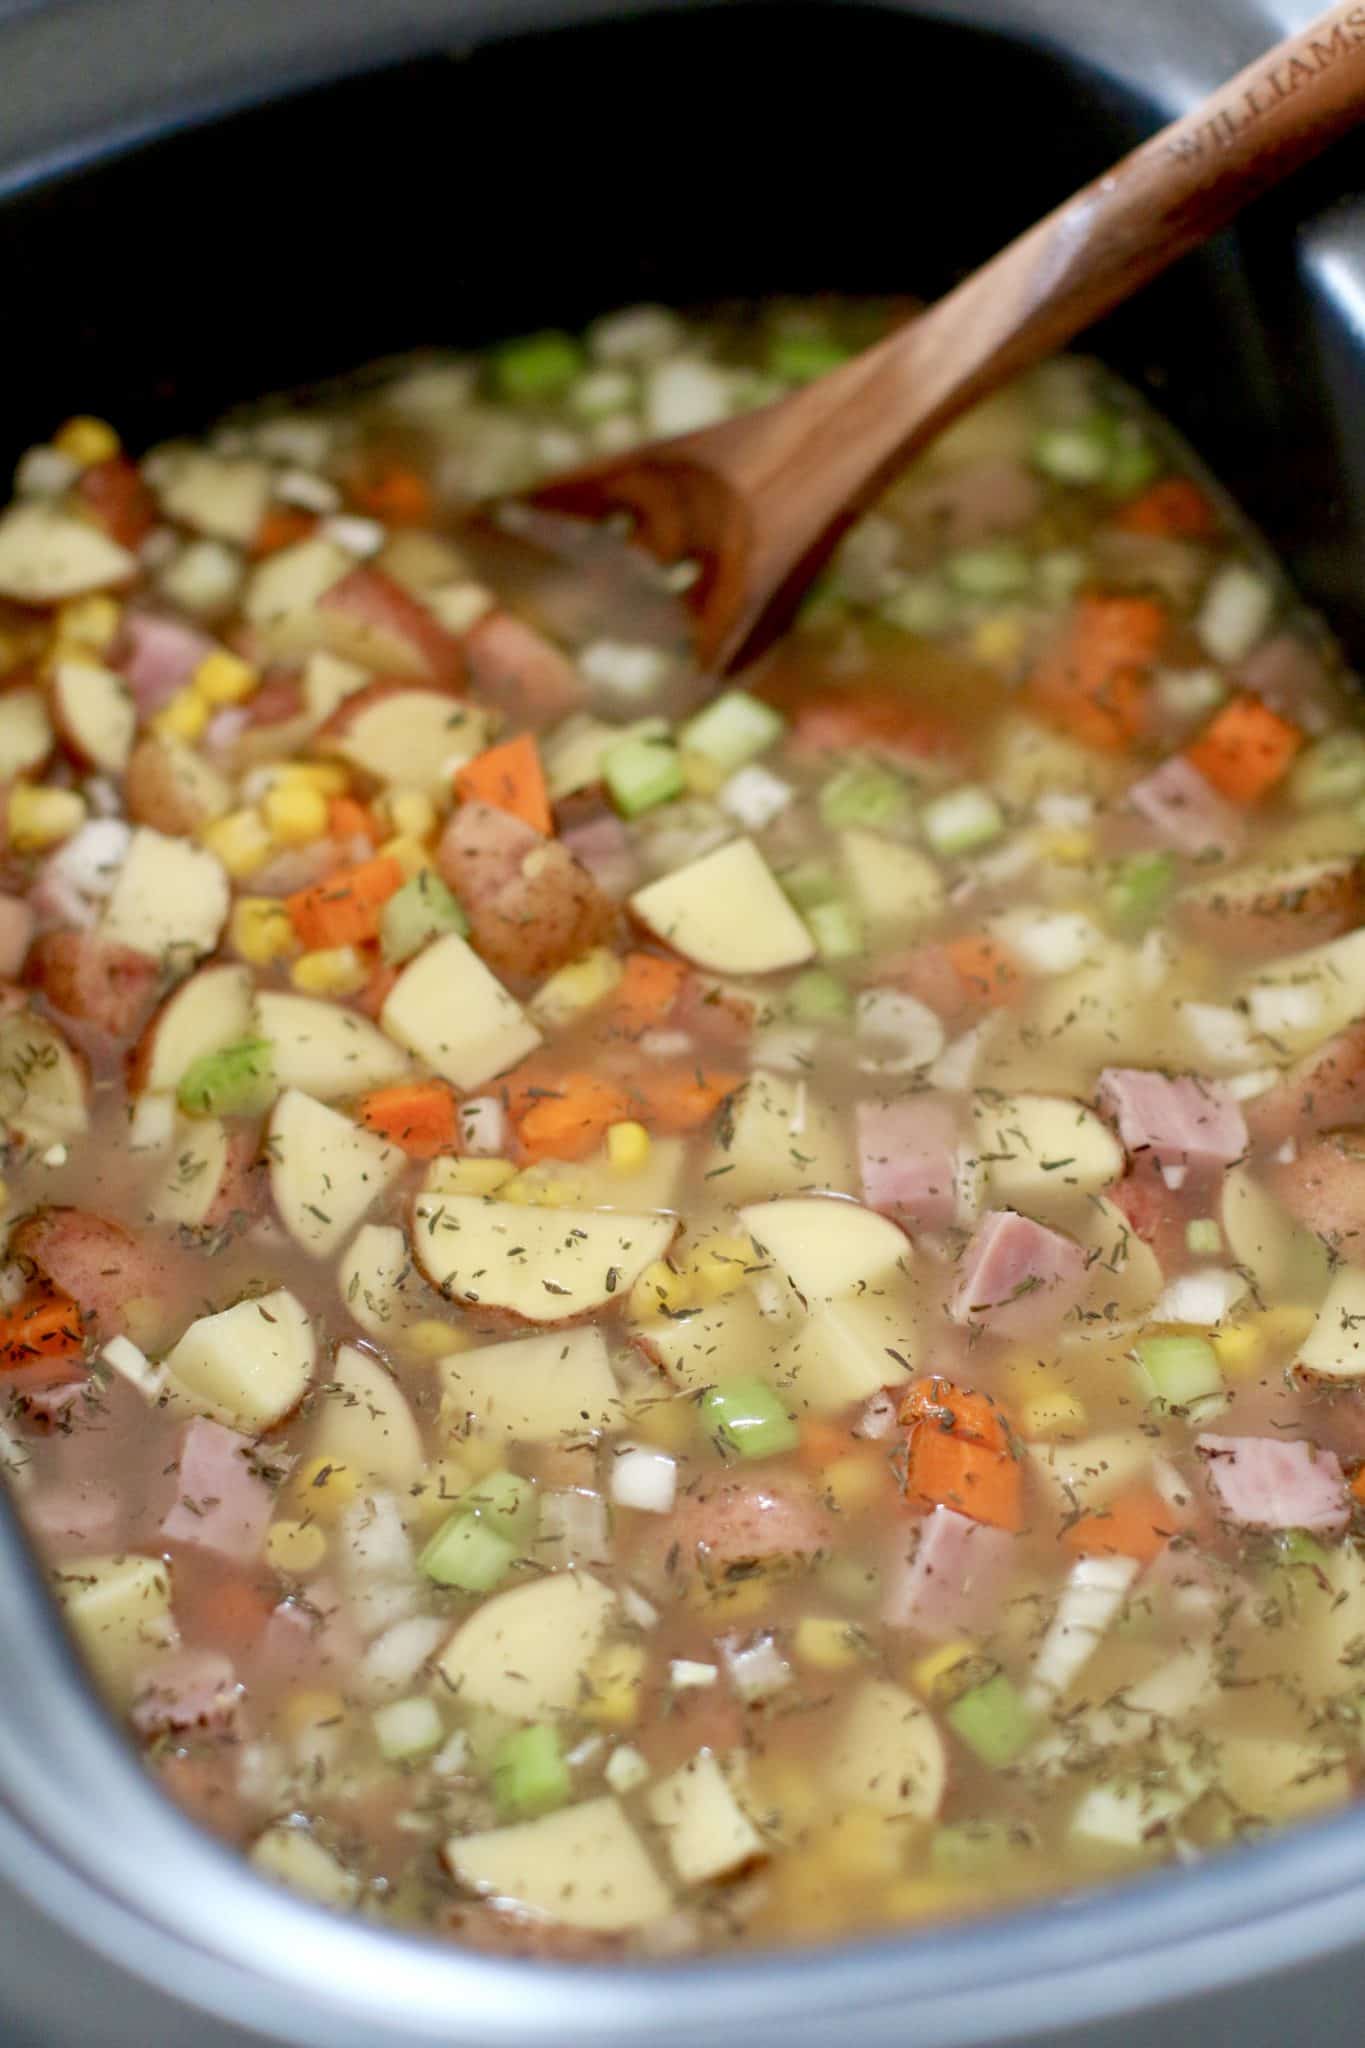 slow cooker filled with chicken broth, diced potatoes, ham, carrots, celery and seasoning.